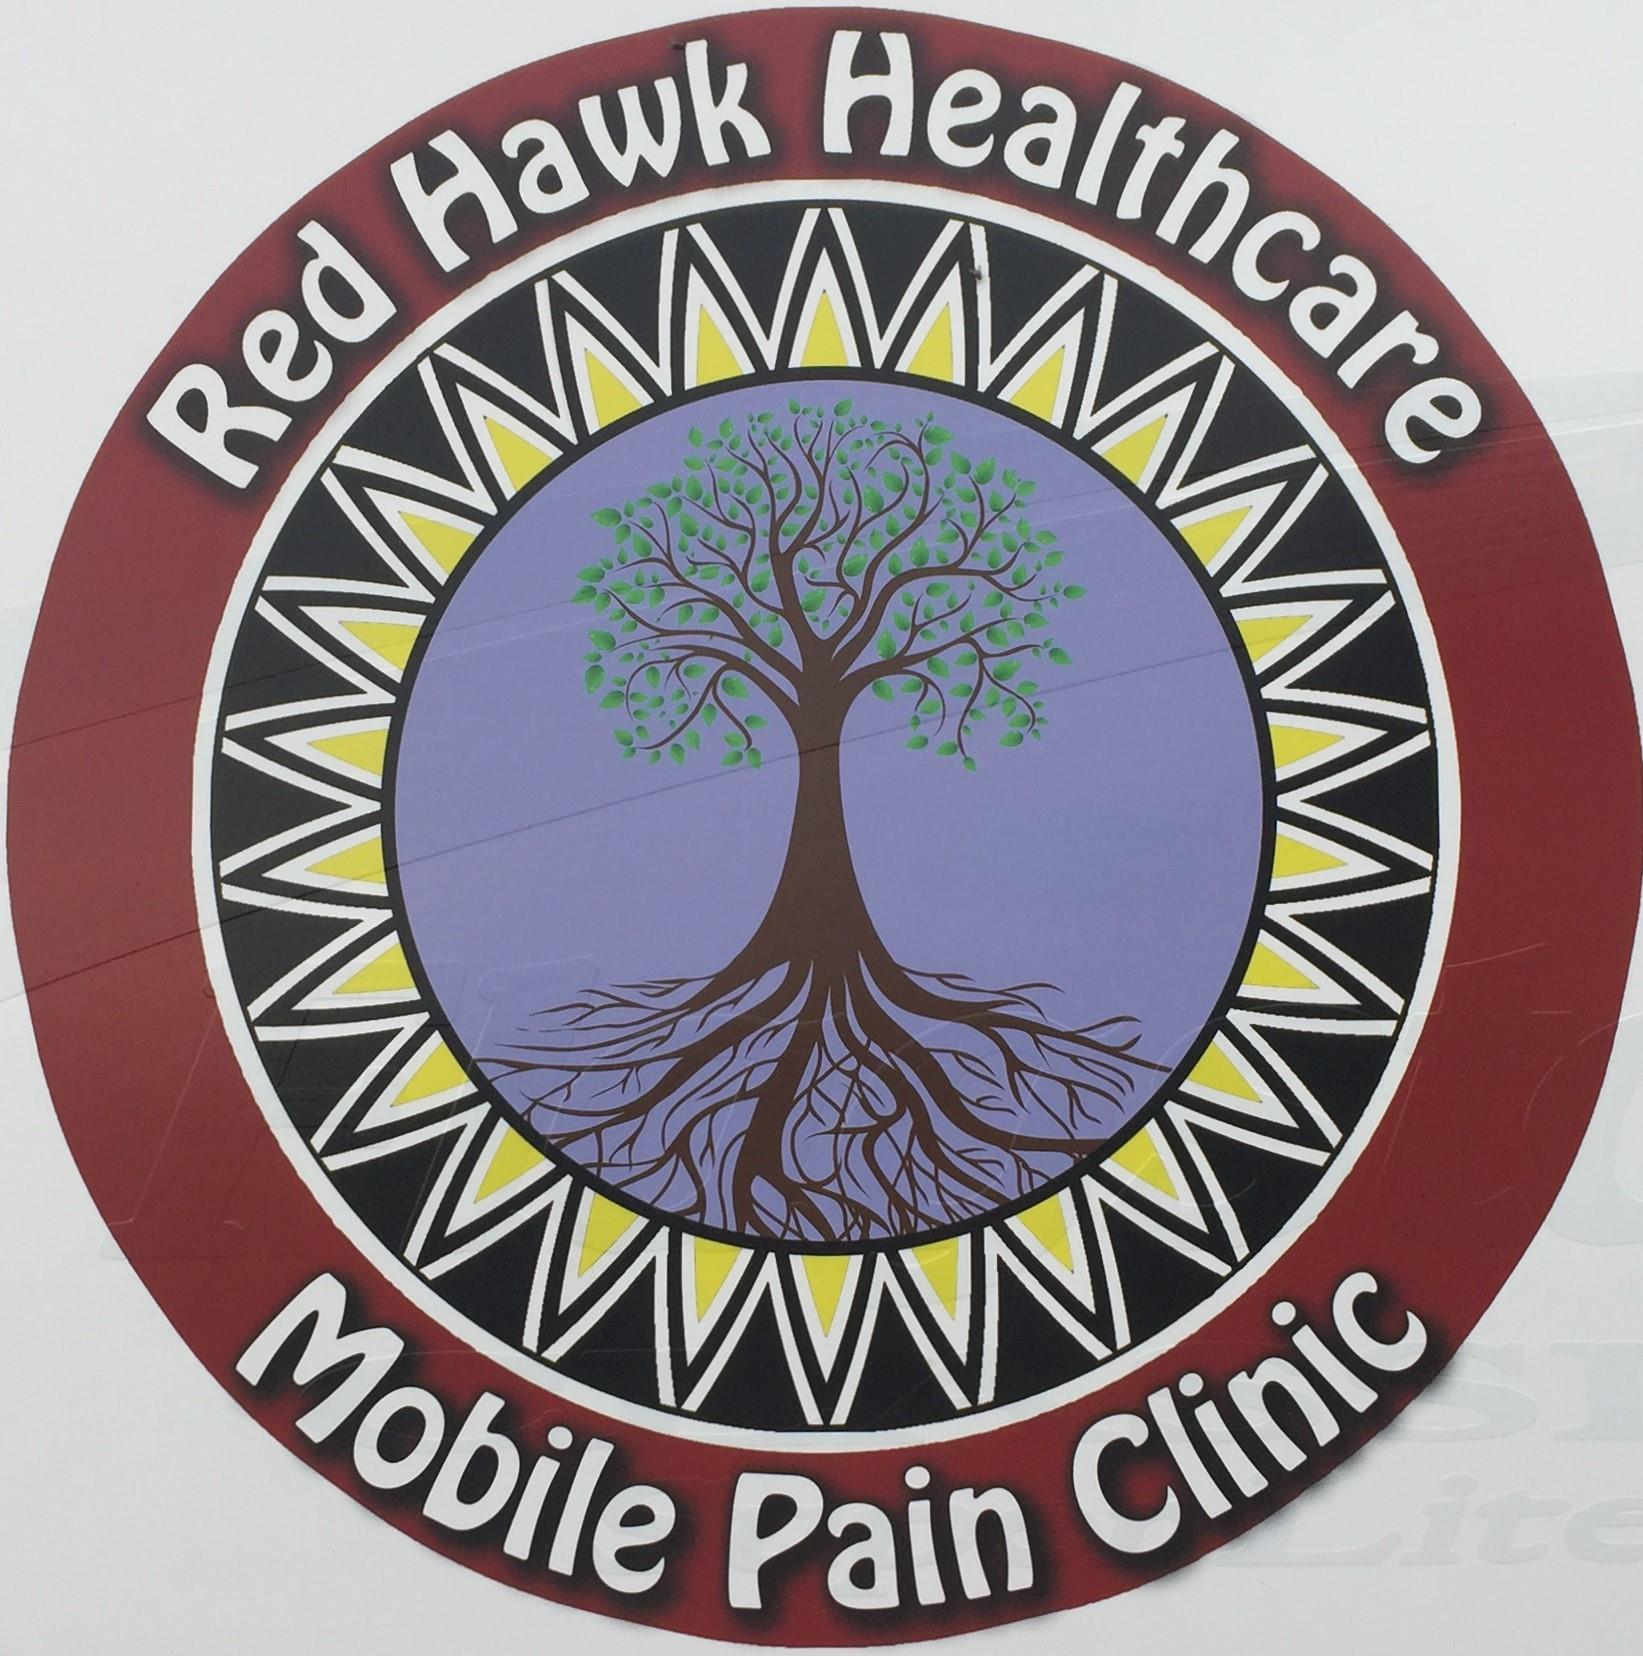 Red Hawk Healthcare Mobile Clinic